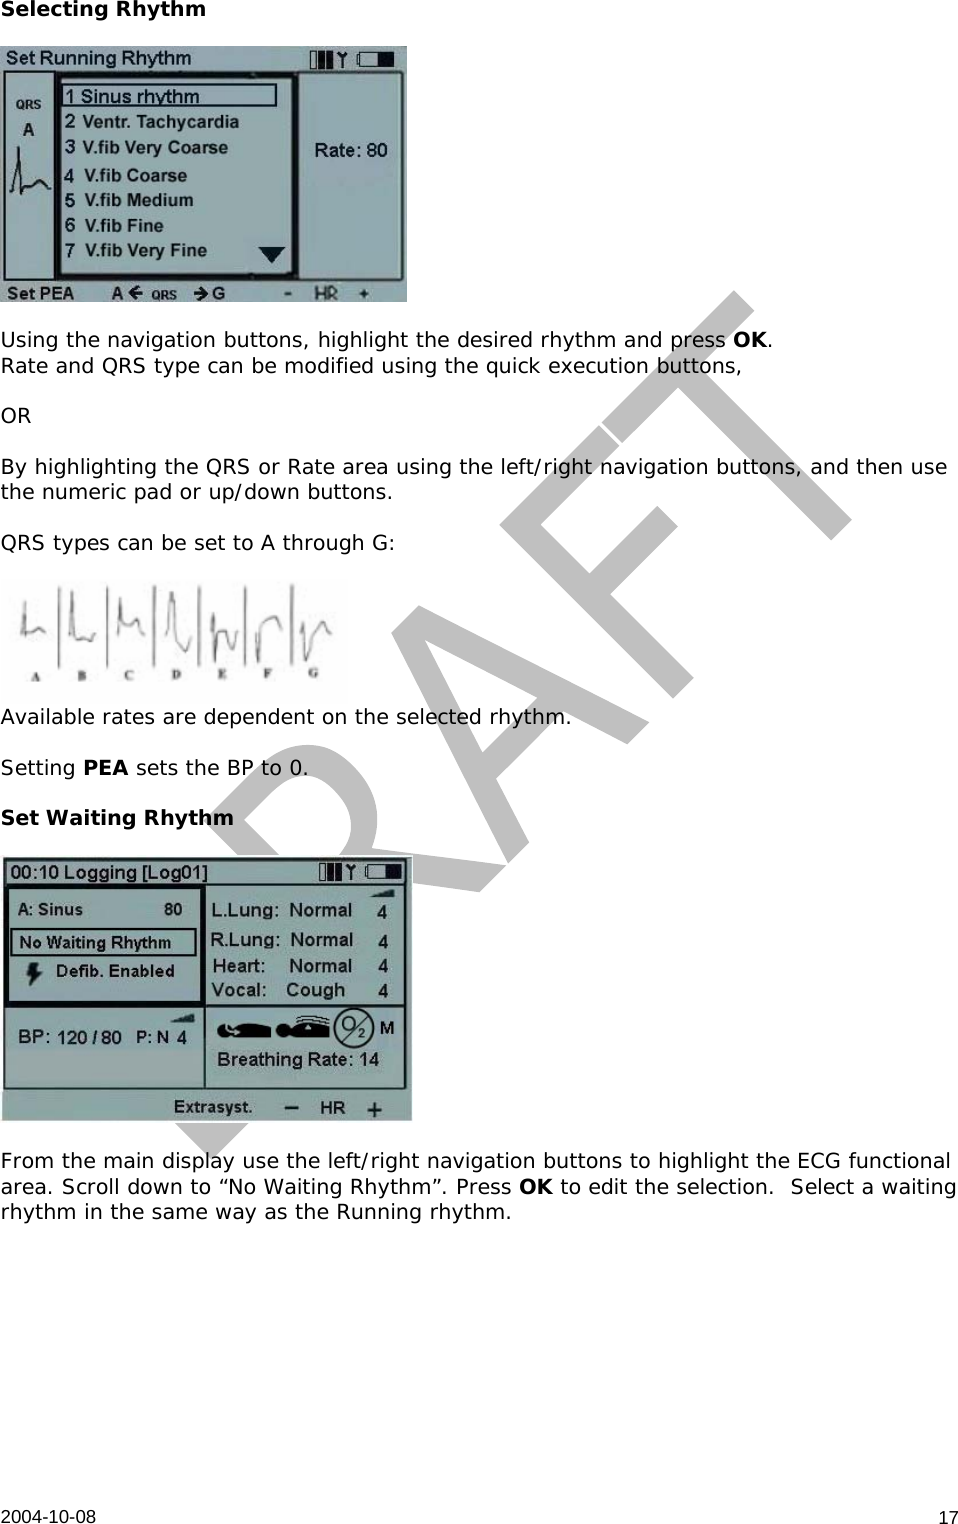  2004-10-08   17Selecting Rhythm    Using the navigation buttons, highlight the desired rhythm and press OK.  Rate and QRS type can be modified using the quick execution buttons,  OR  By highlighting the QRS or Rate area using the left/right navigation buttons, and then use the numeric pad or up/down buttons.  QRS types can be set to A through G:   Available rates are dependent on the selected rhythm.  Setting PEA sets the BP to 0.  Set Waiting Rhythm    From the main display use the left/right navigation buttons to highlight the ECG functional area. Scroll down to “No Waiting Rhythm”. Press OK to edit the selection.  Select a waiting rhythm in the same way as the Running rhythm.  